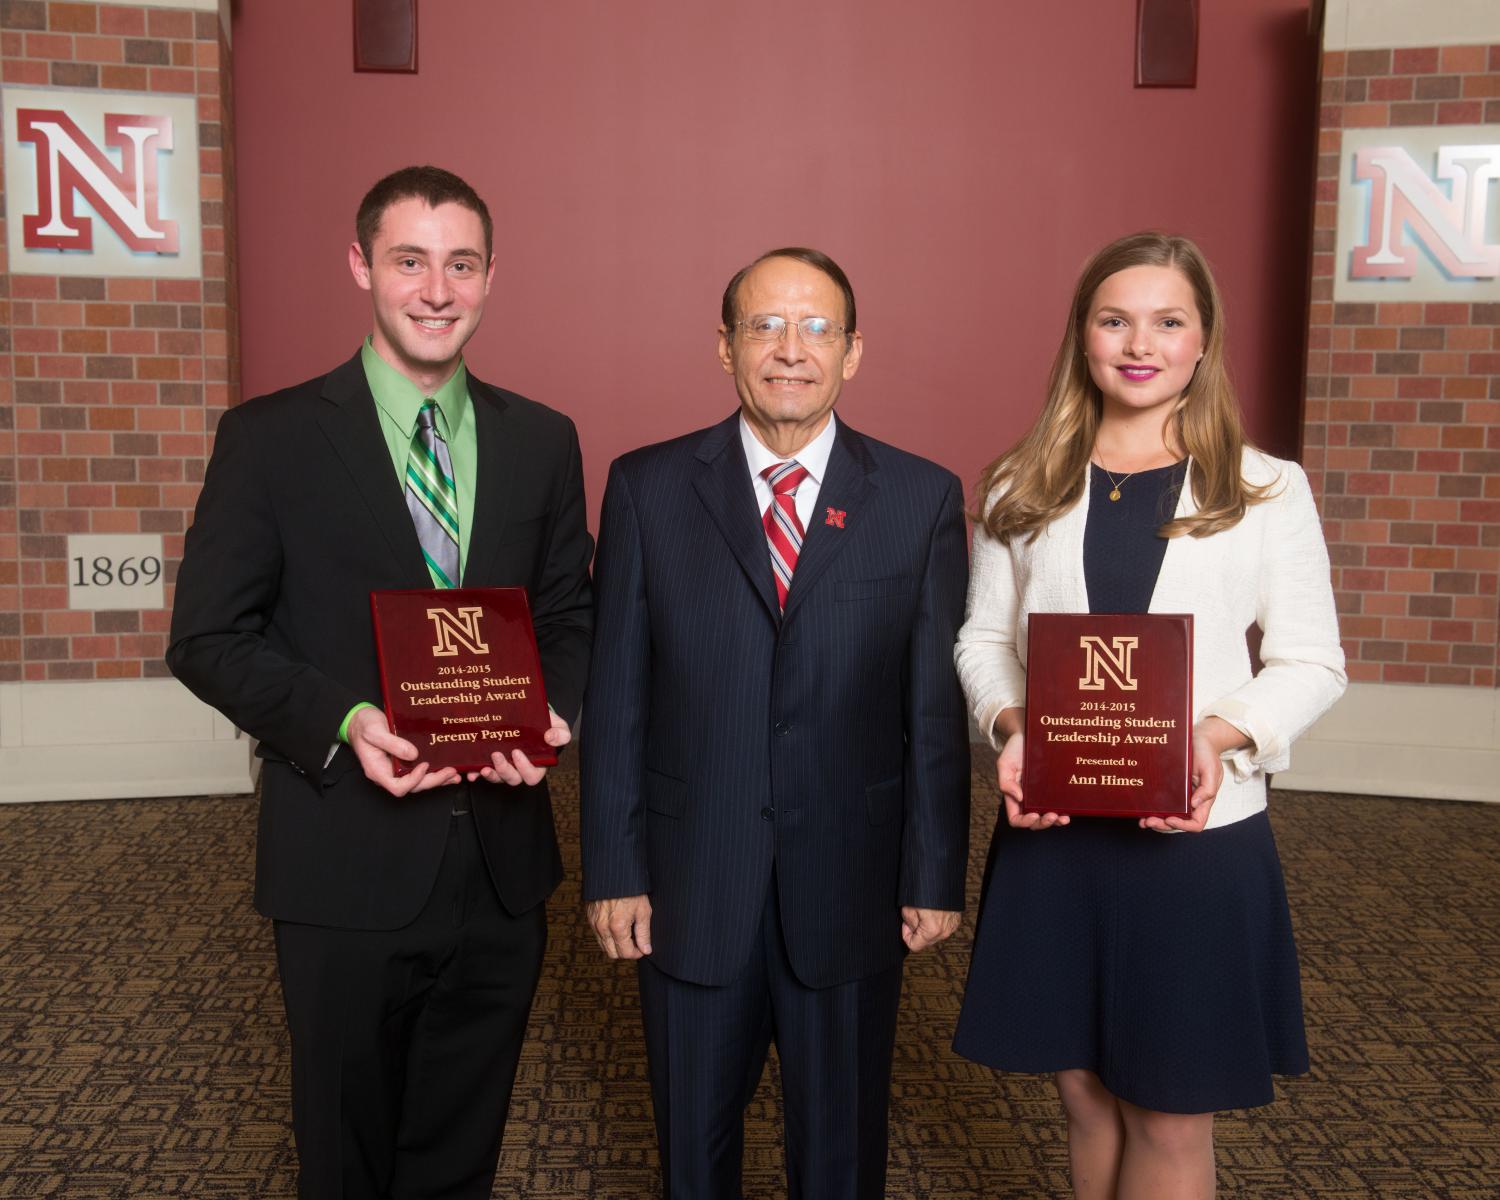 Photo Credit: Jeremy Payne and Annie Himes receive Outstanding Student Leadership Awards